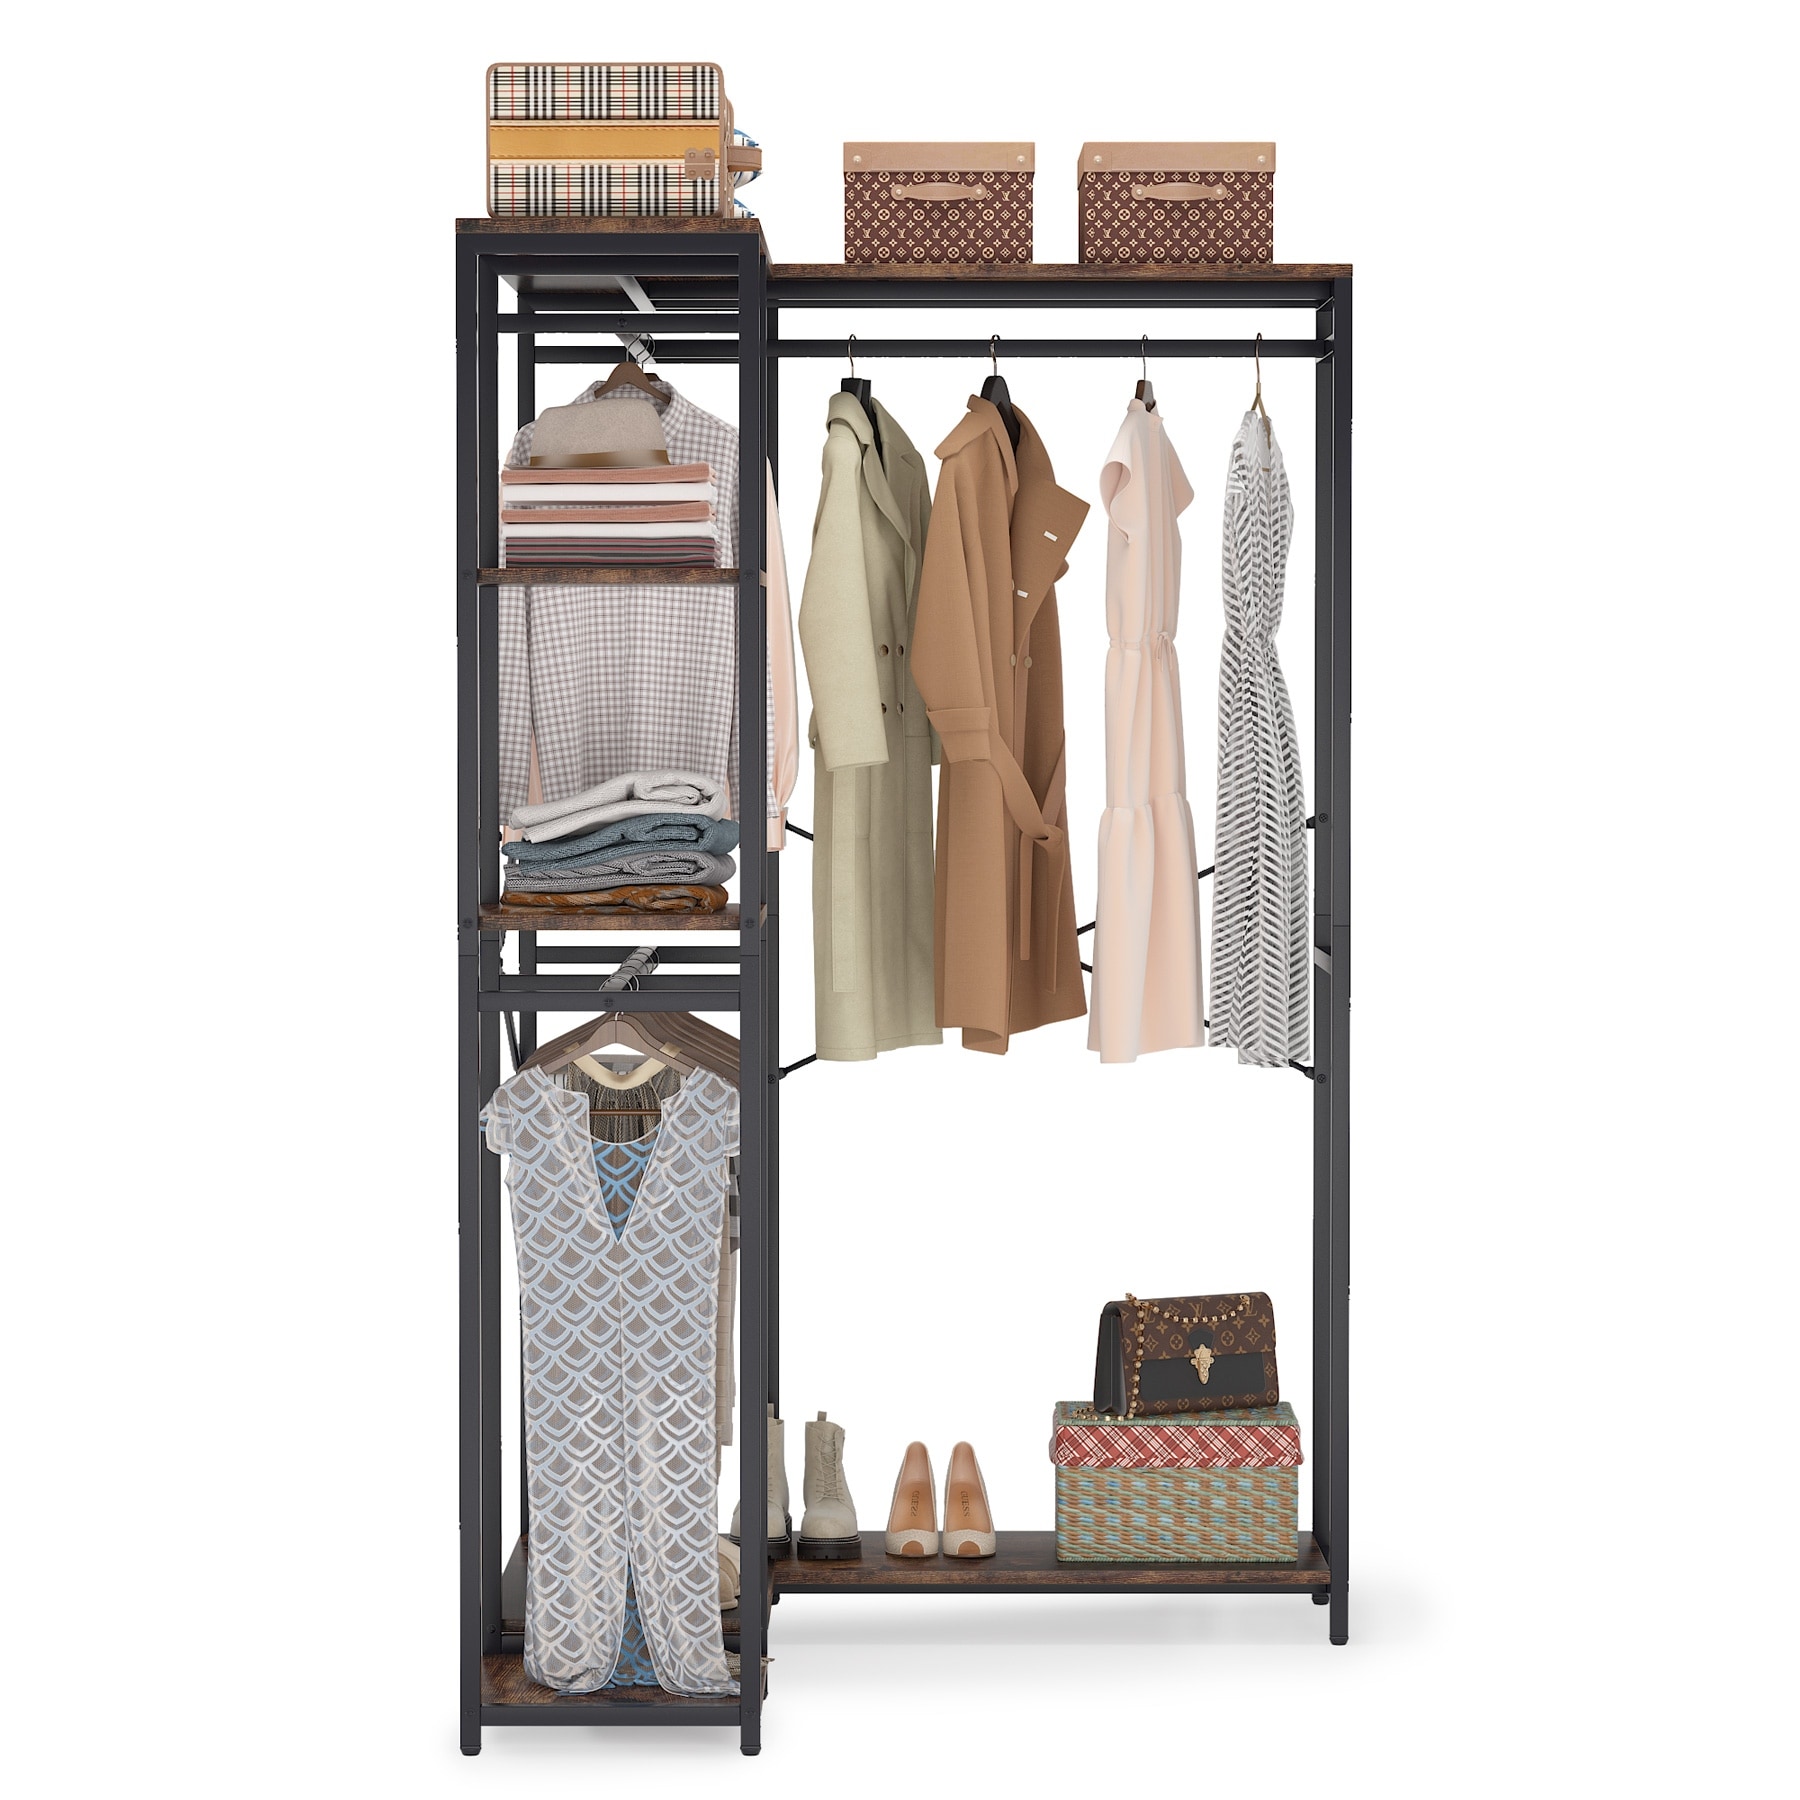 https://ak1.ostkcdn.com/images/products/is/images/direct/ee63ff1997ca6fac3f05752fce46294d2b329fc9/Freestanding-L-Shape-Closet-Organizer%2C47.24%22-W-Closet-Corner-System%2C-4-Tier-Clothing-Garment-Rack-with-4-Hanging-Rods.jpg